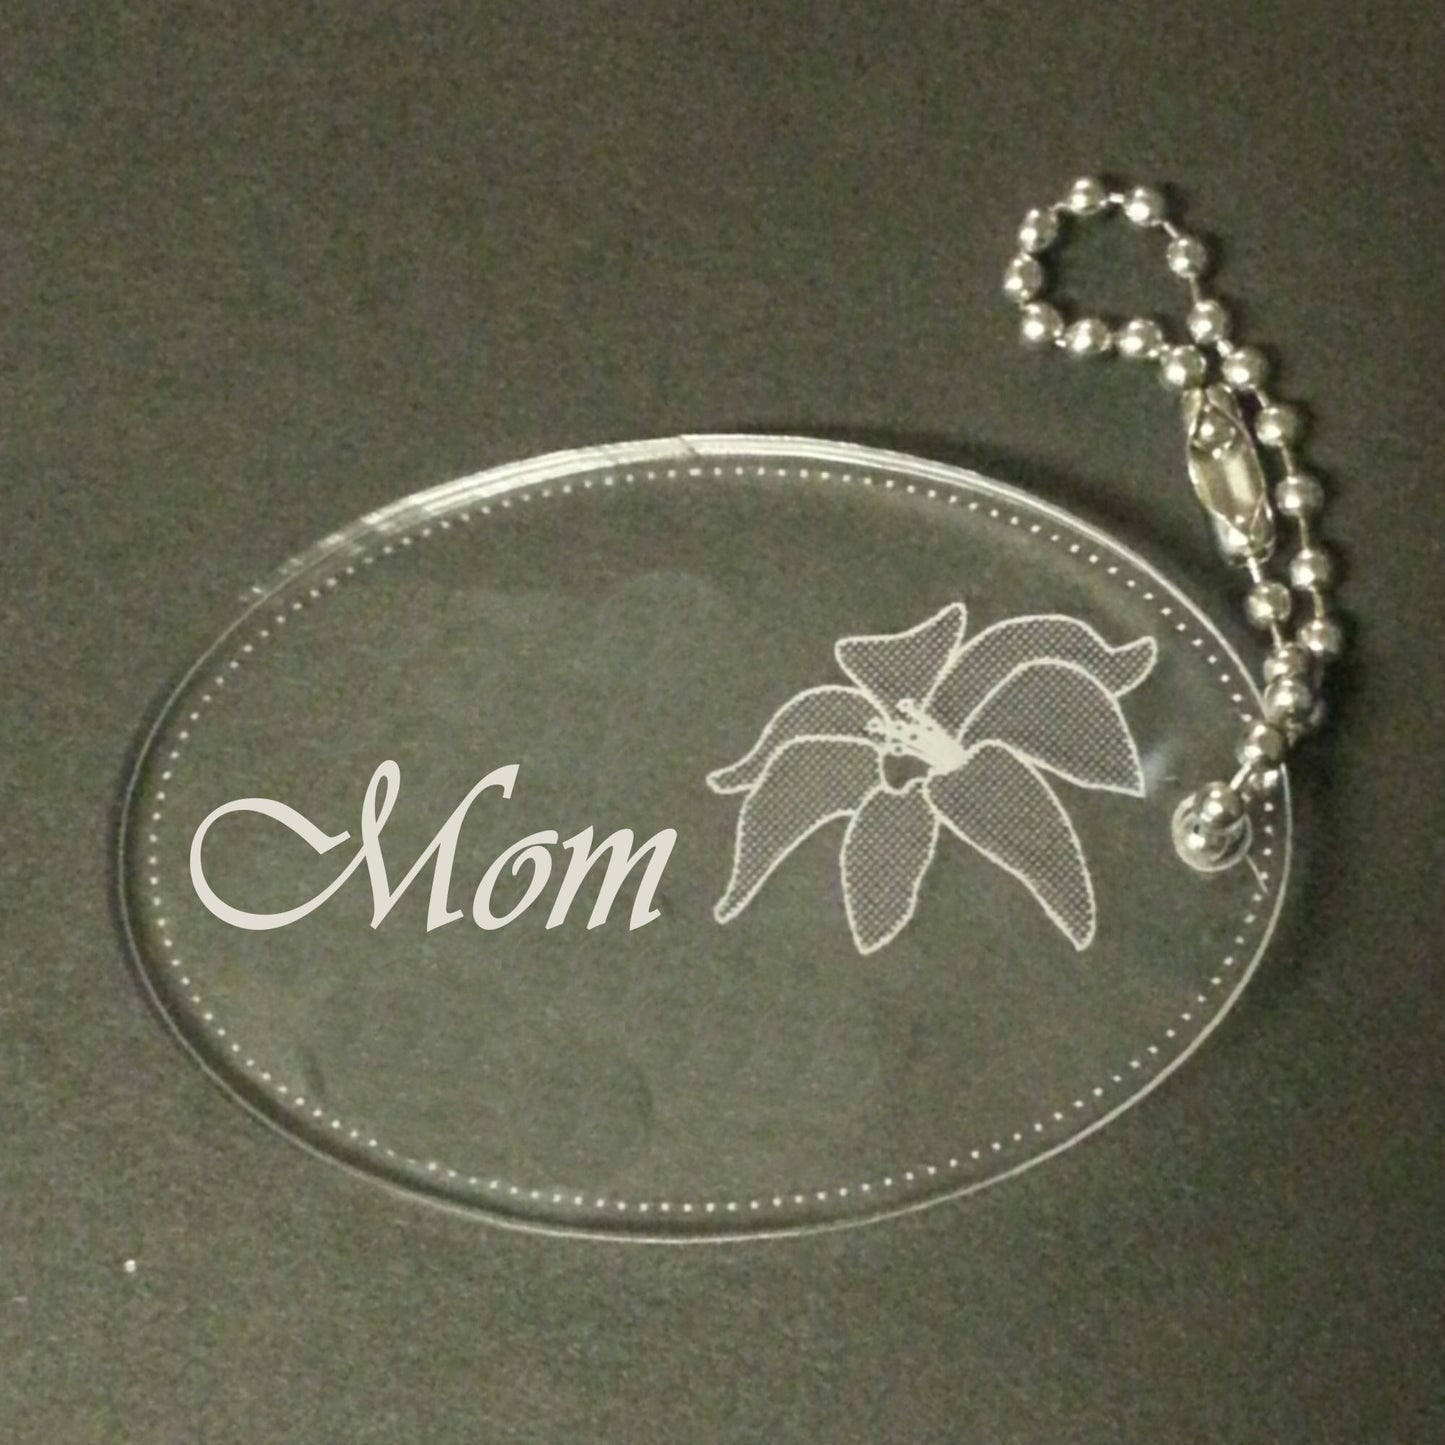 acrylic oval keychain favor engraved with a lily design and attached to a small chain